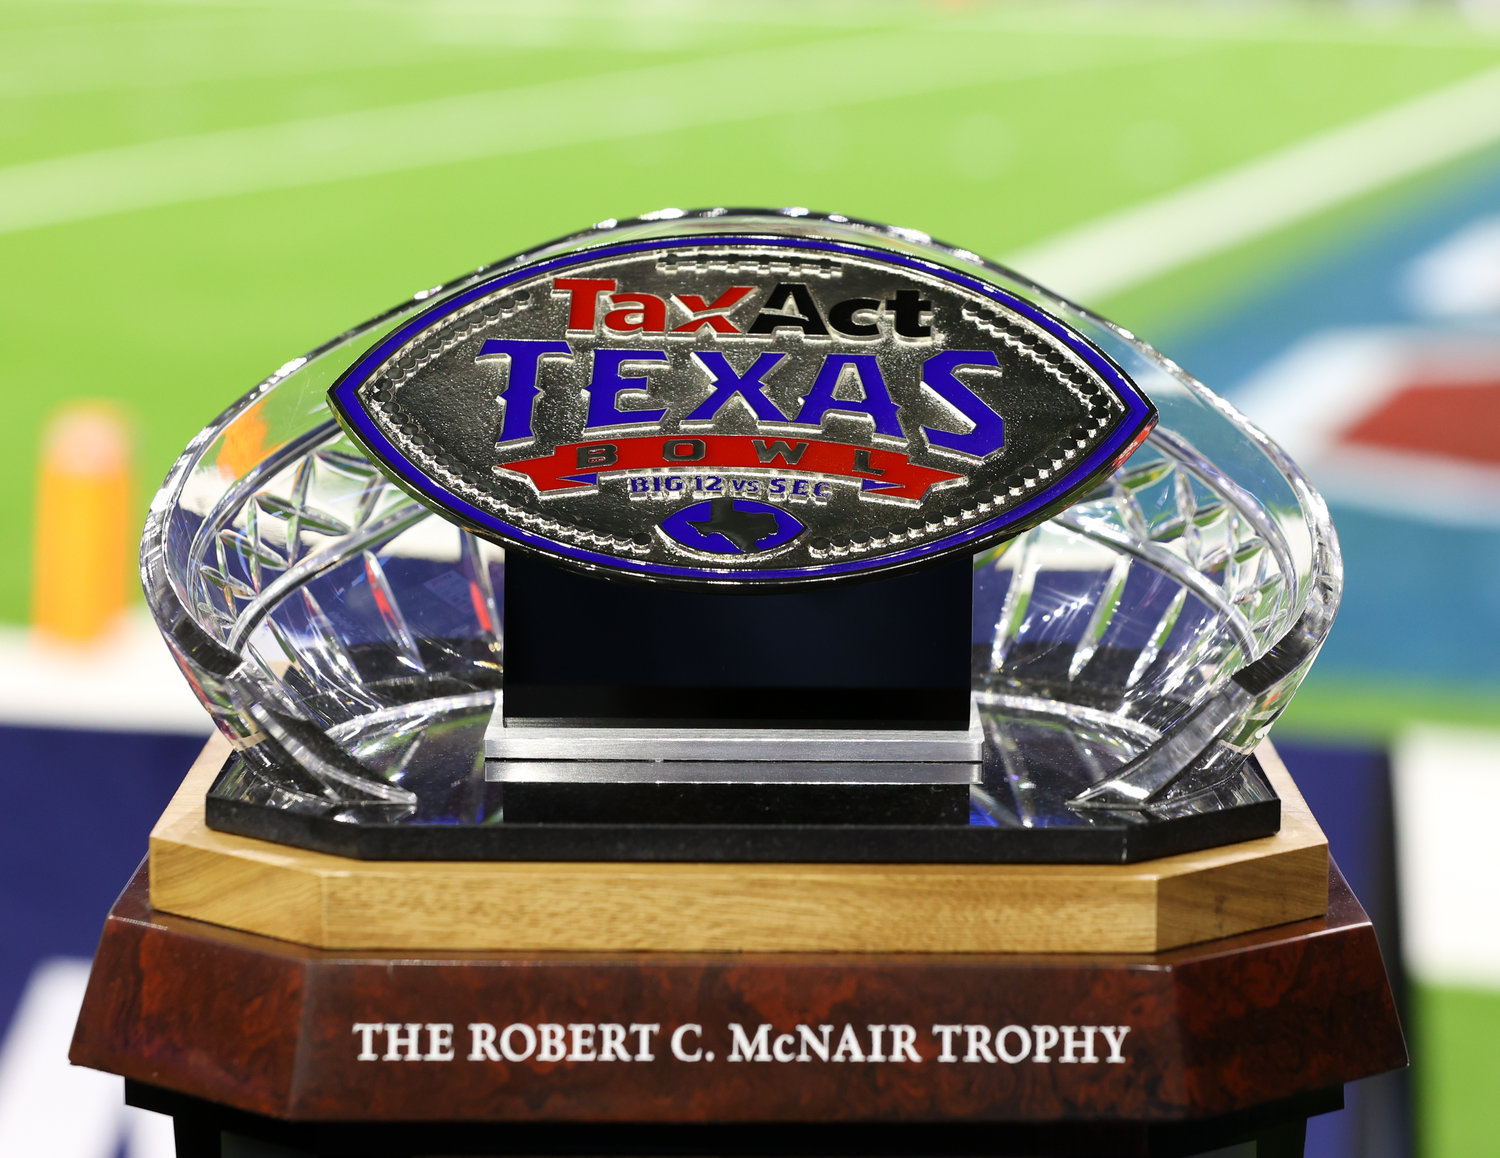 The TaxAct Texas Bowl trophy, on the sidelines during a bowl game between Texas Tech and Ole Miss on Dec. 28, 2022 in Houston. Texas Tech won, 42-25.